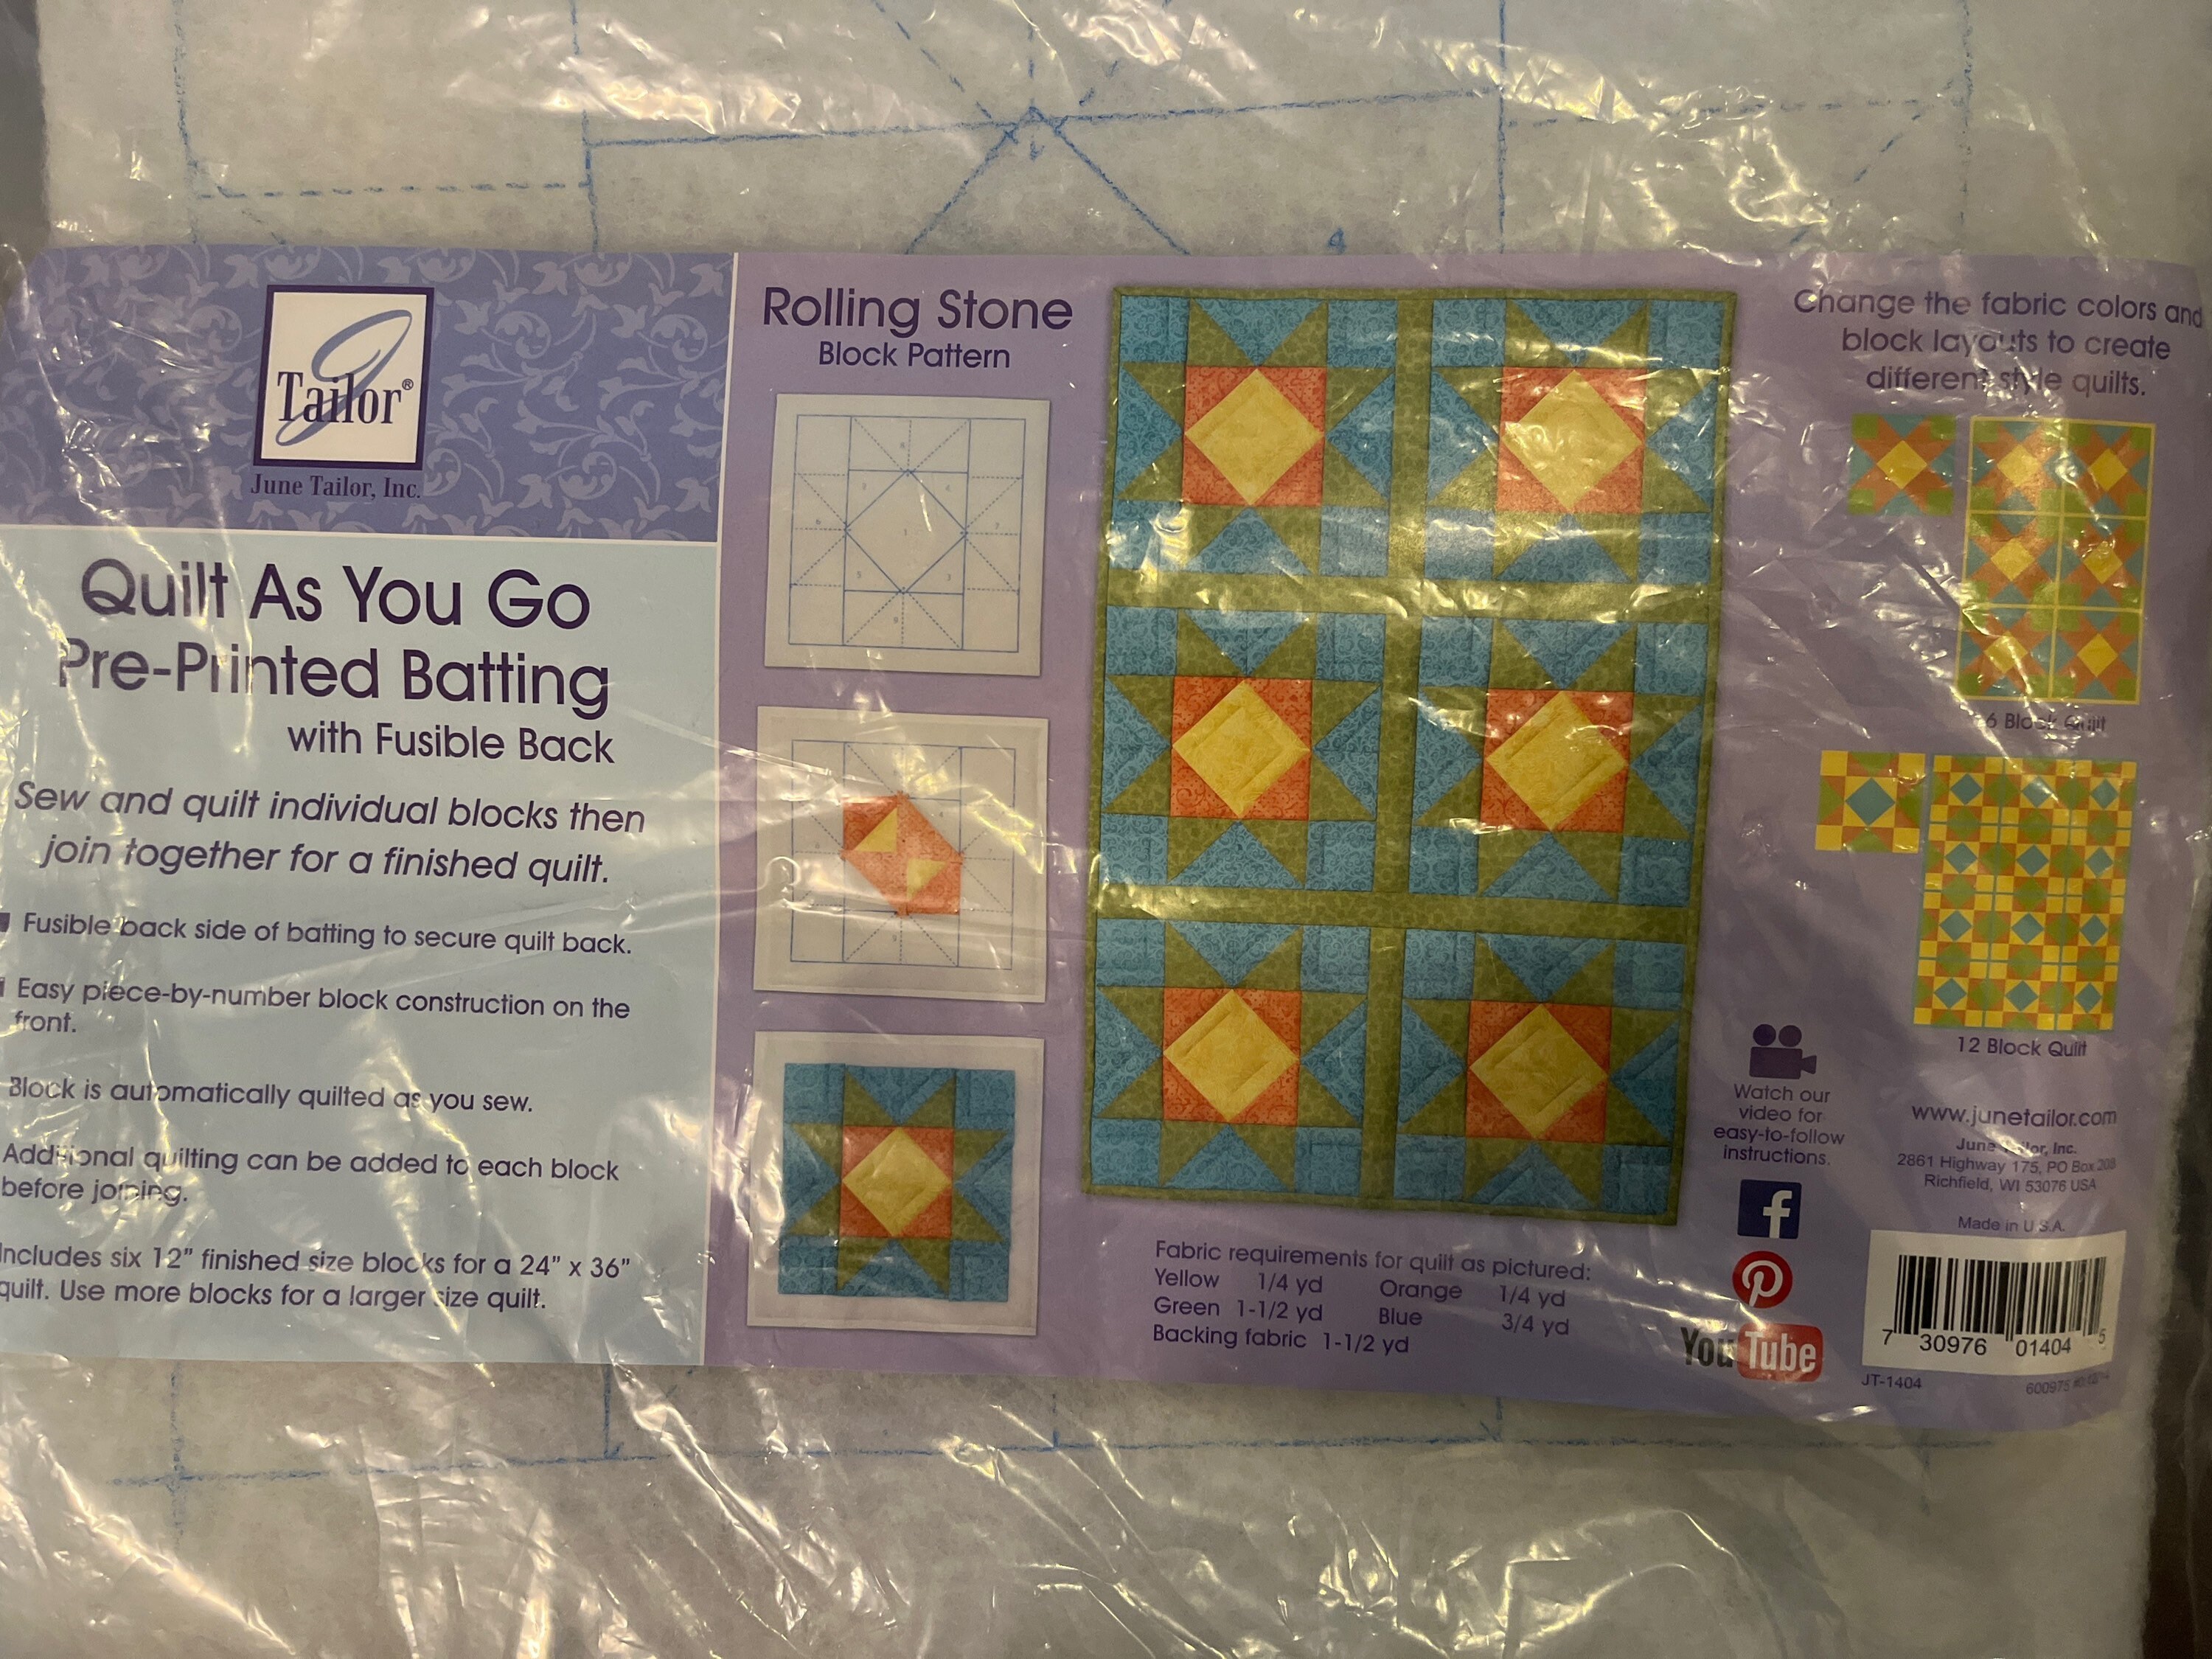 Quilt as You Go Quilt Blocks Pre Printed Fusible Batting 